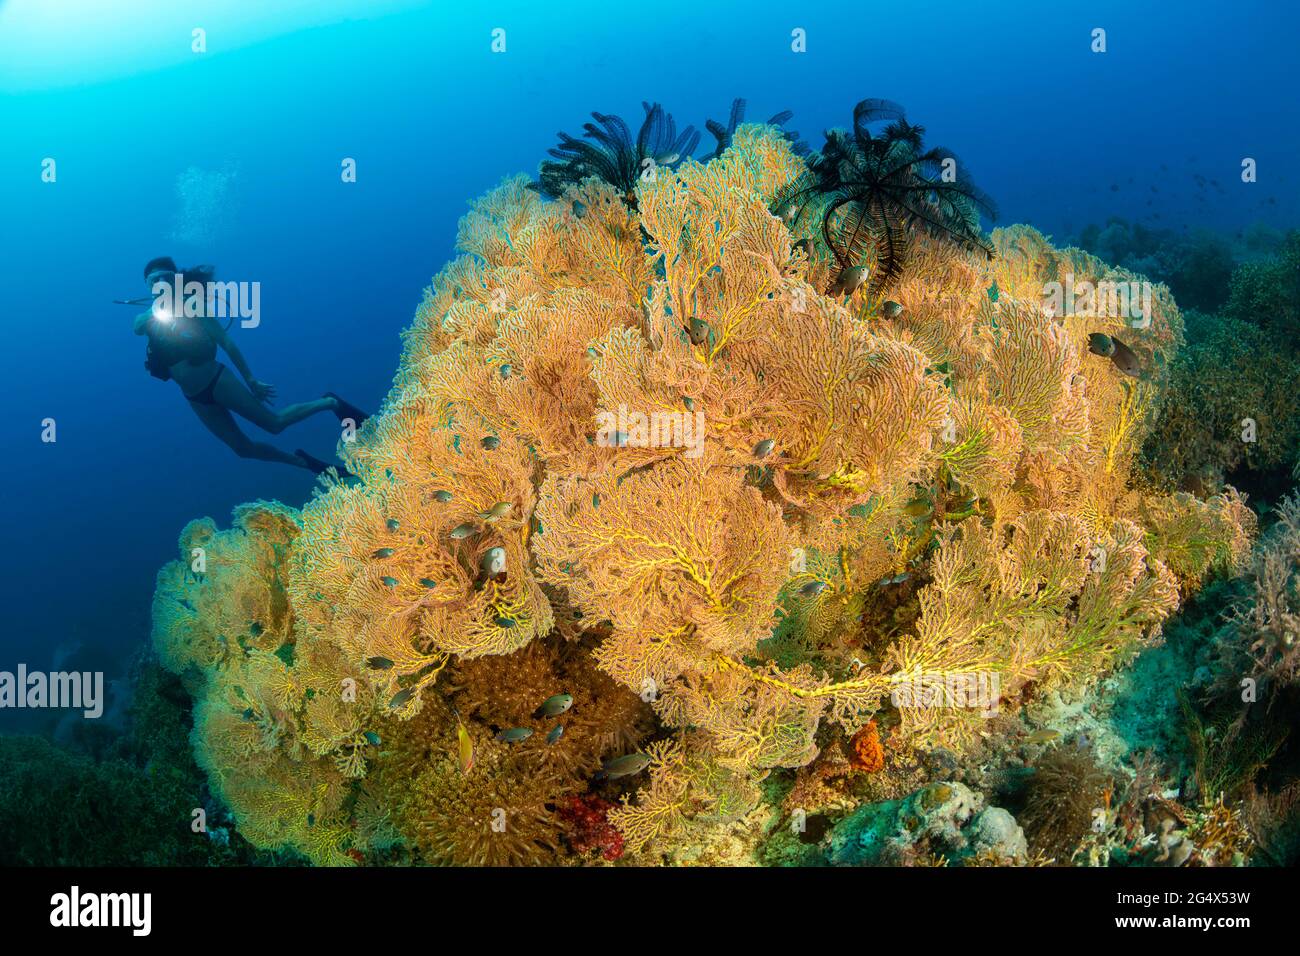 Diver (MR) and a coral head covered with gorgonian fans and two crinoids on top, Philippines. Stock Photo